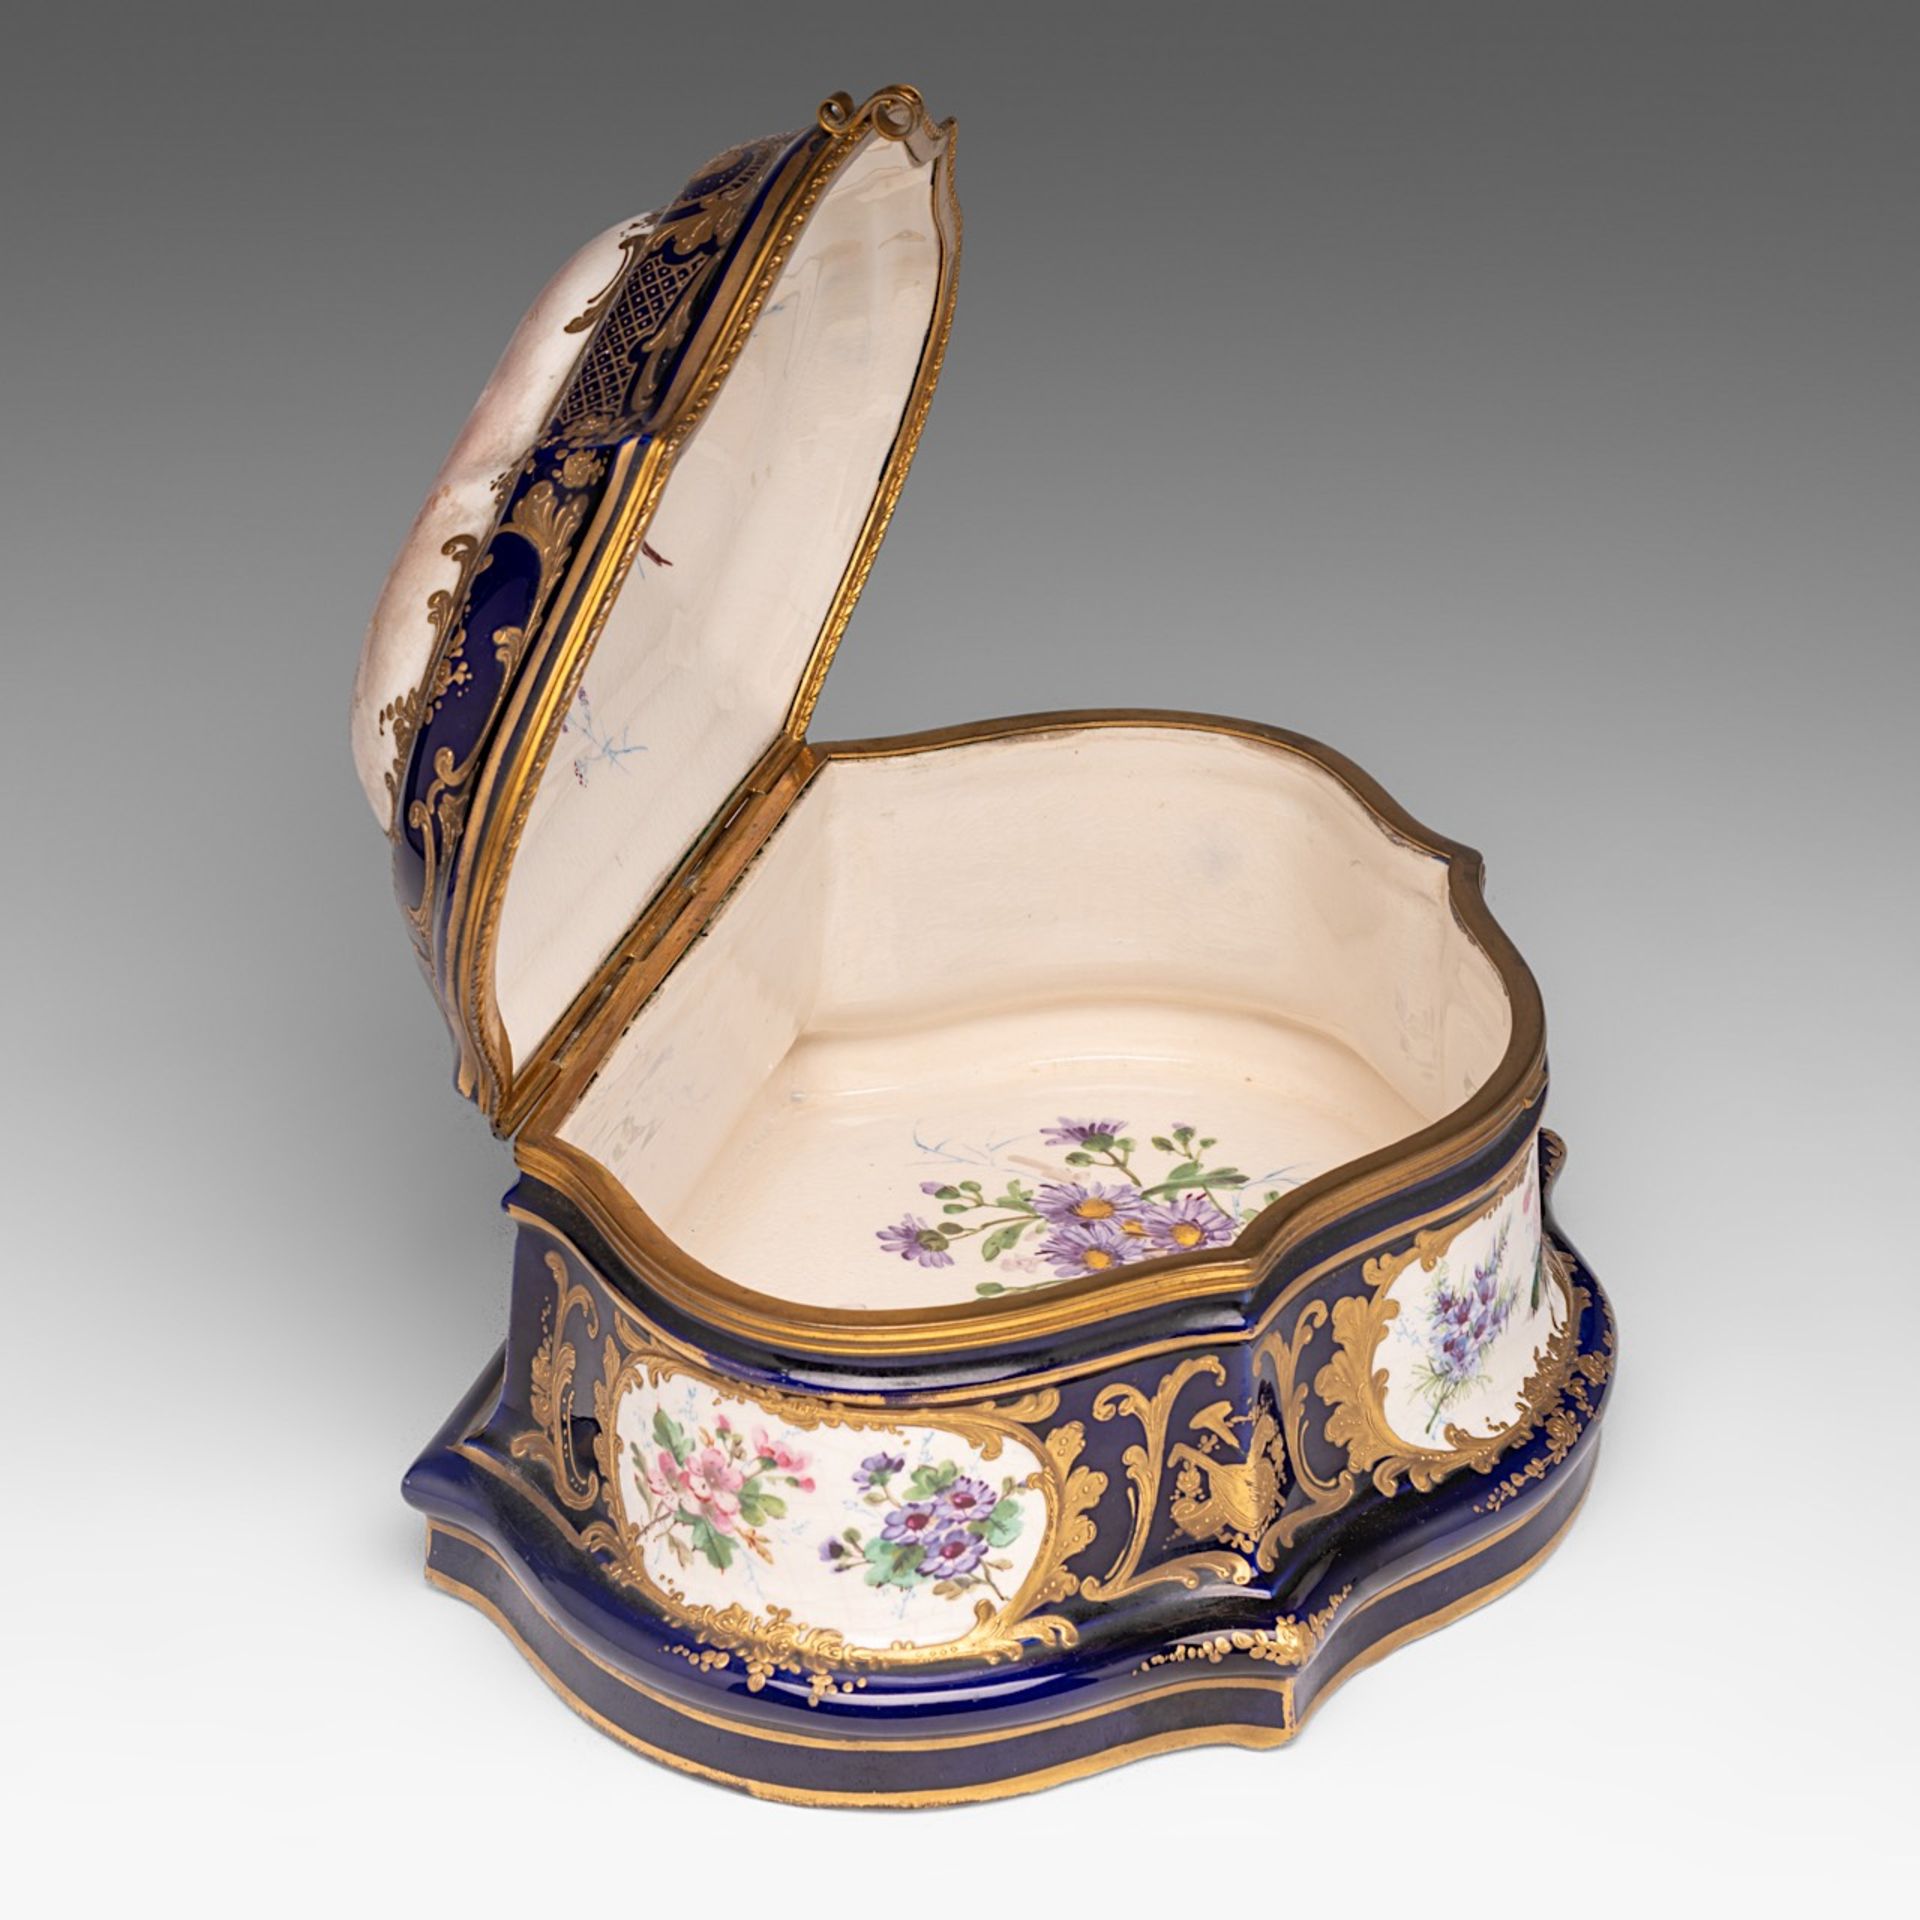 A fine bleu royale ground Sevres box with gilt decoration and hand-painted roundels, signed A. Collo - Image 9 of 12